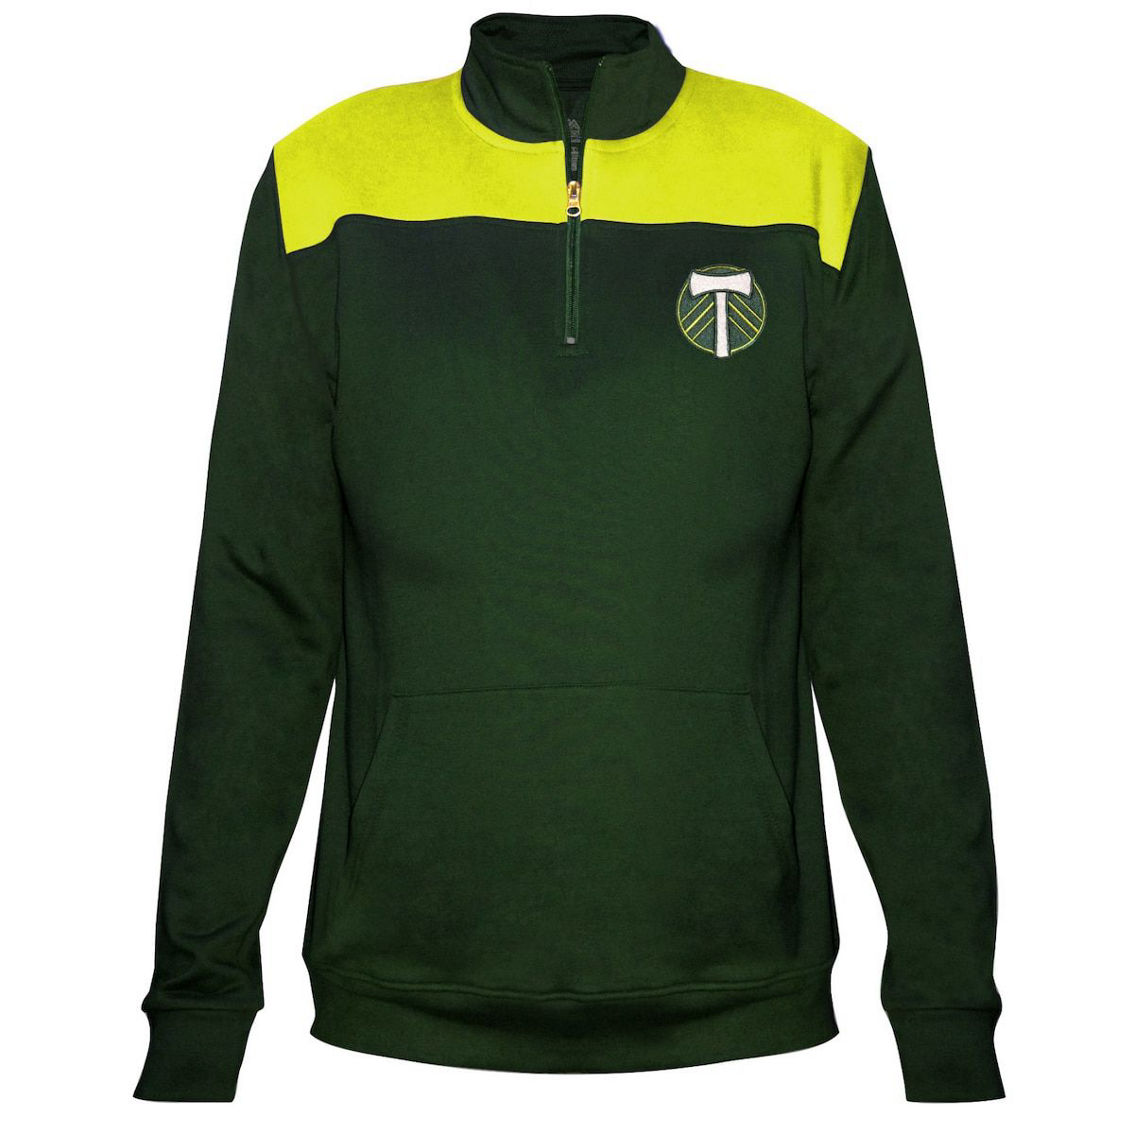 Majestic Women's Green Portland Timbers 1/4-Zip Pullover Jacket - Image 2 of 3